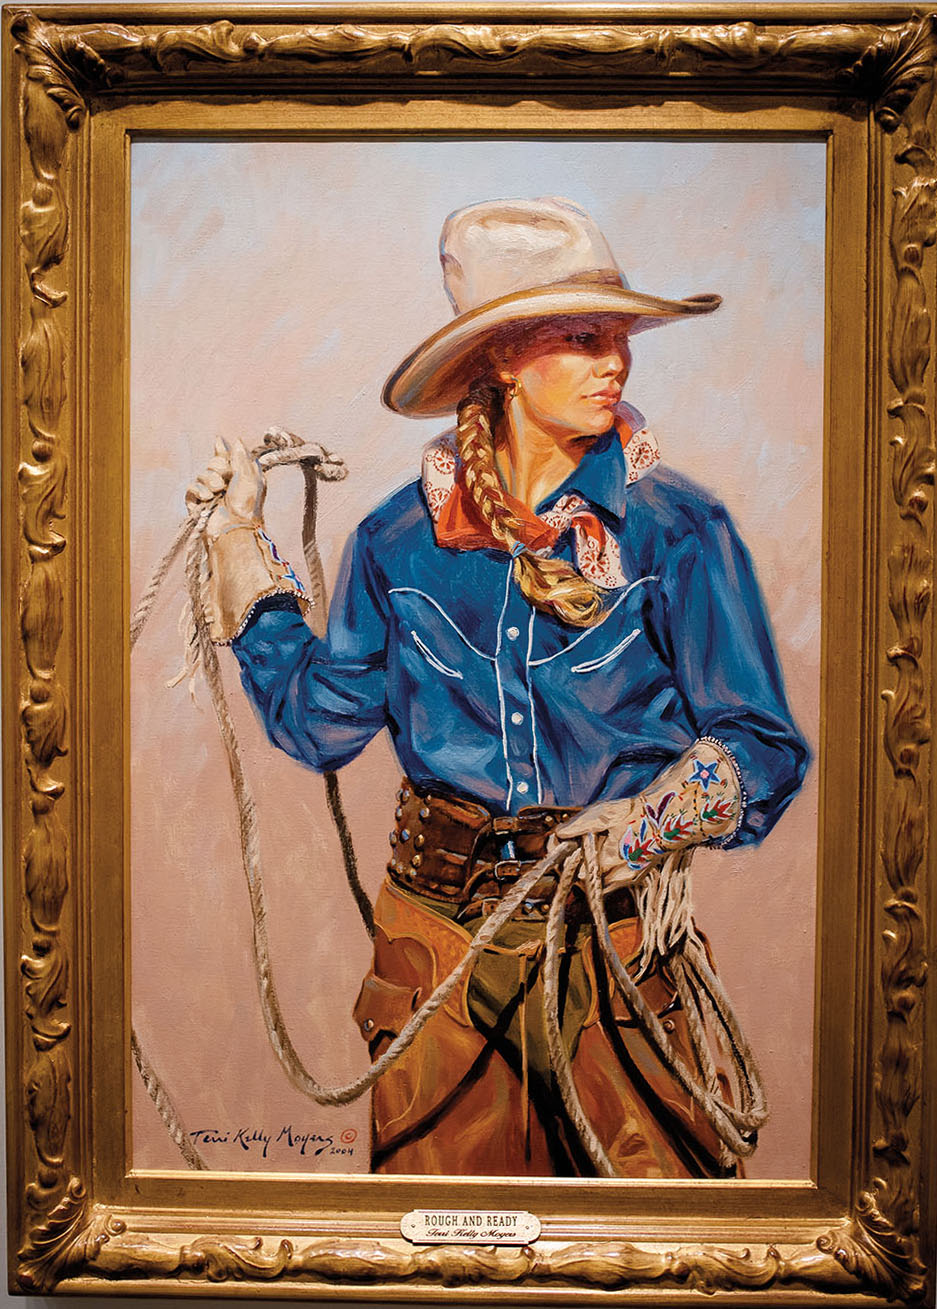 A painting of a cowgirl holding a rope in a denim shirt, in a golden frame